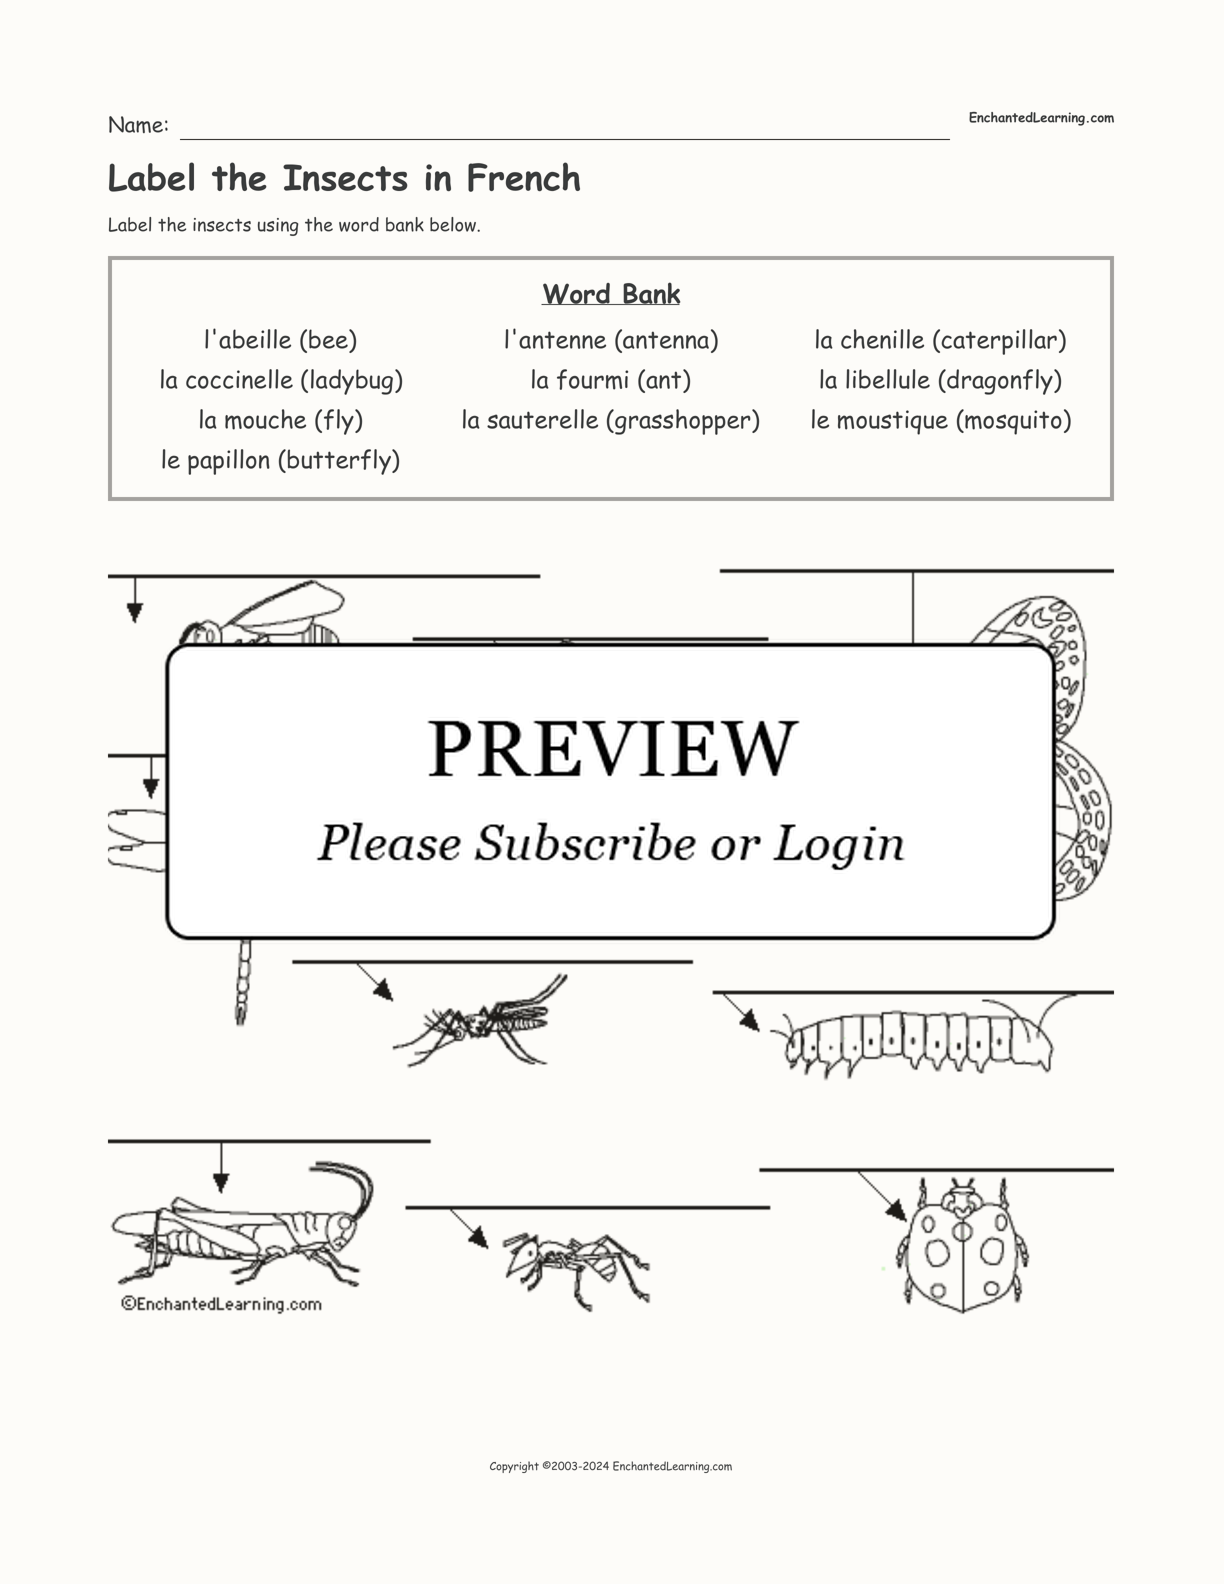 Label the Insects in French interactive worksheet page 1